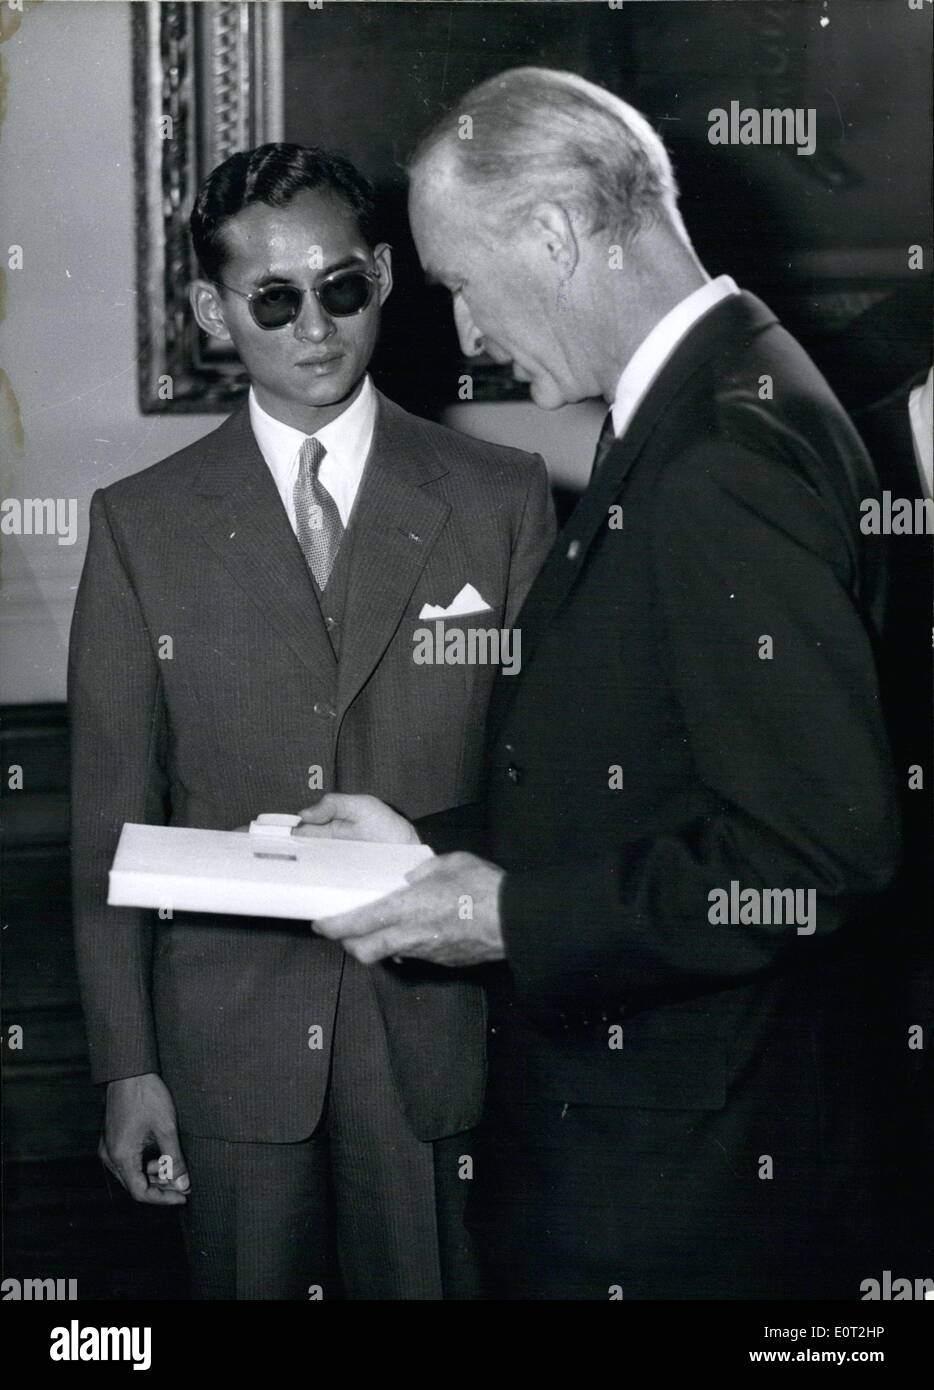 Jul. 29, 1960 - A reception for King and Queen of Siam.. was held by Alfried Krupp von Bohlen und Halbach (Alfrieed Krupp Von Bohlen Und Halbach) in Villa Huge in Essen. Photo shows King Phumipol and Alfried Krupp. Stock Photo